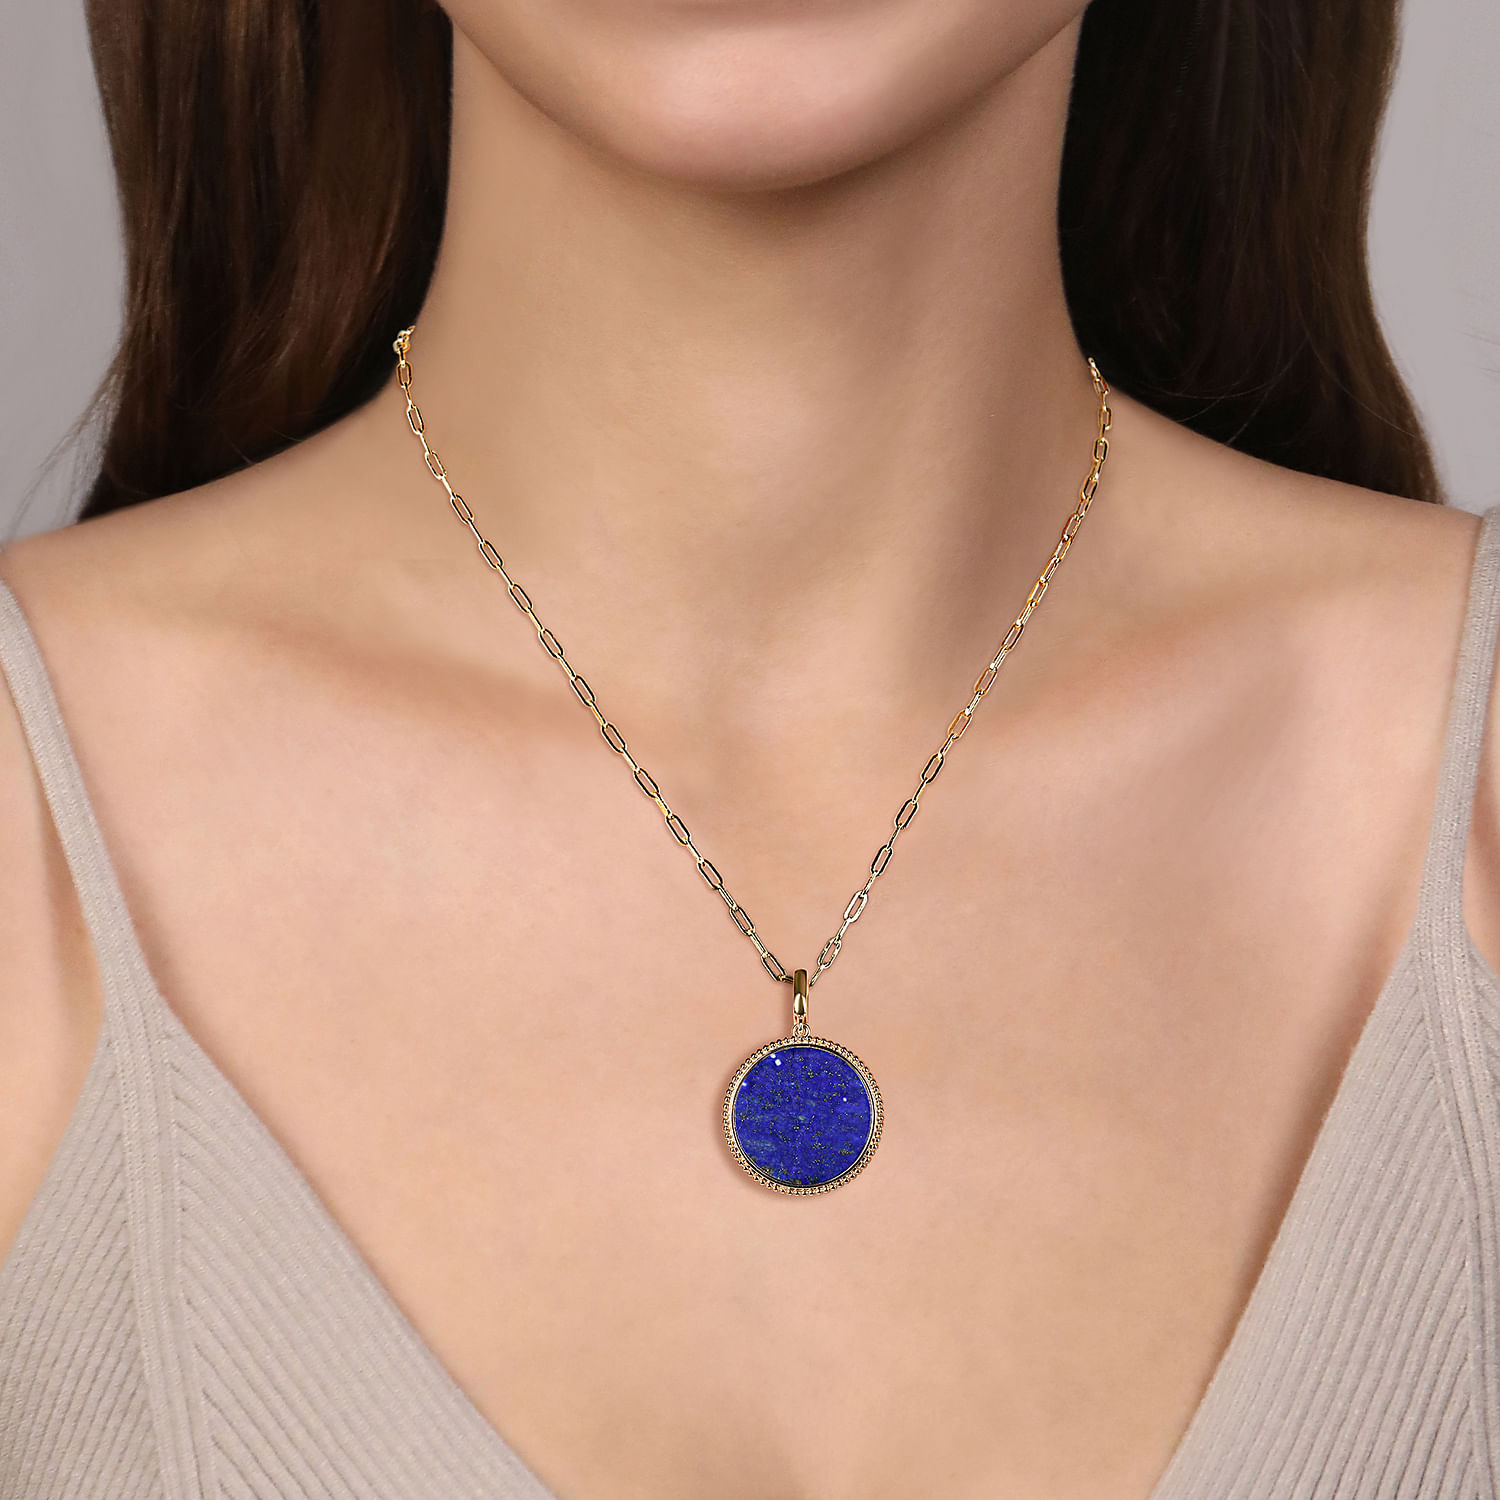 14K Yellow Gold Round Lapis Inlay Medallion Pendant in size 24mm